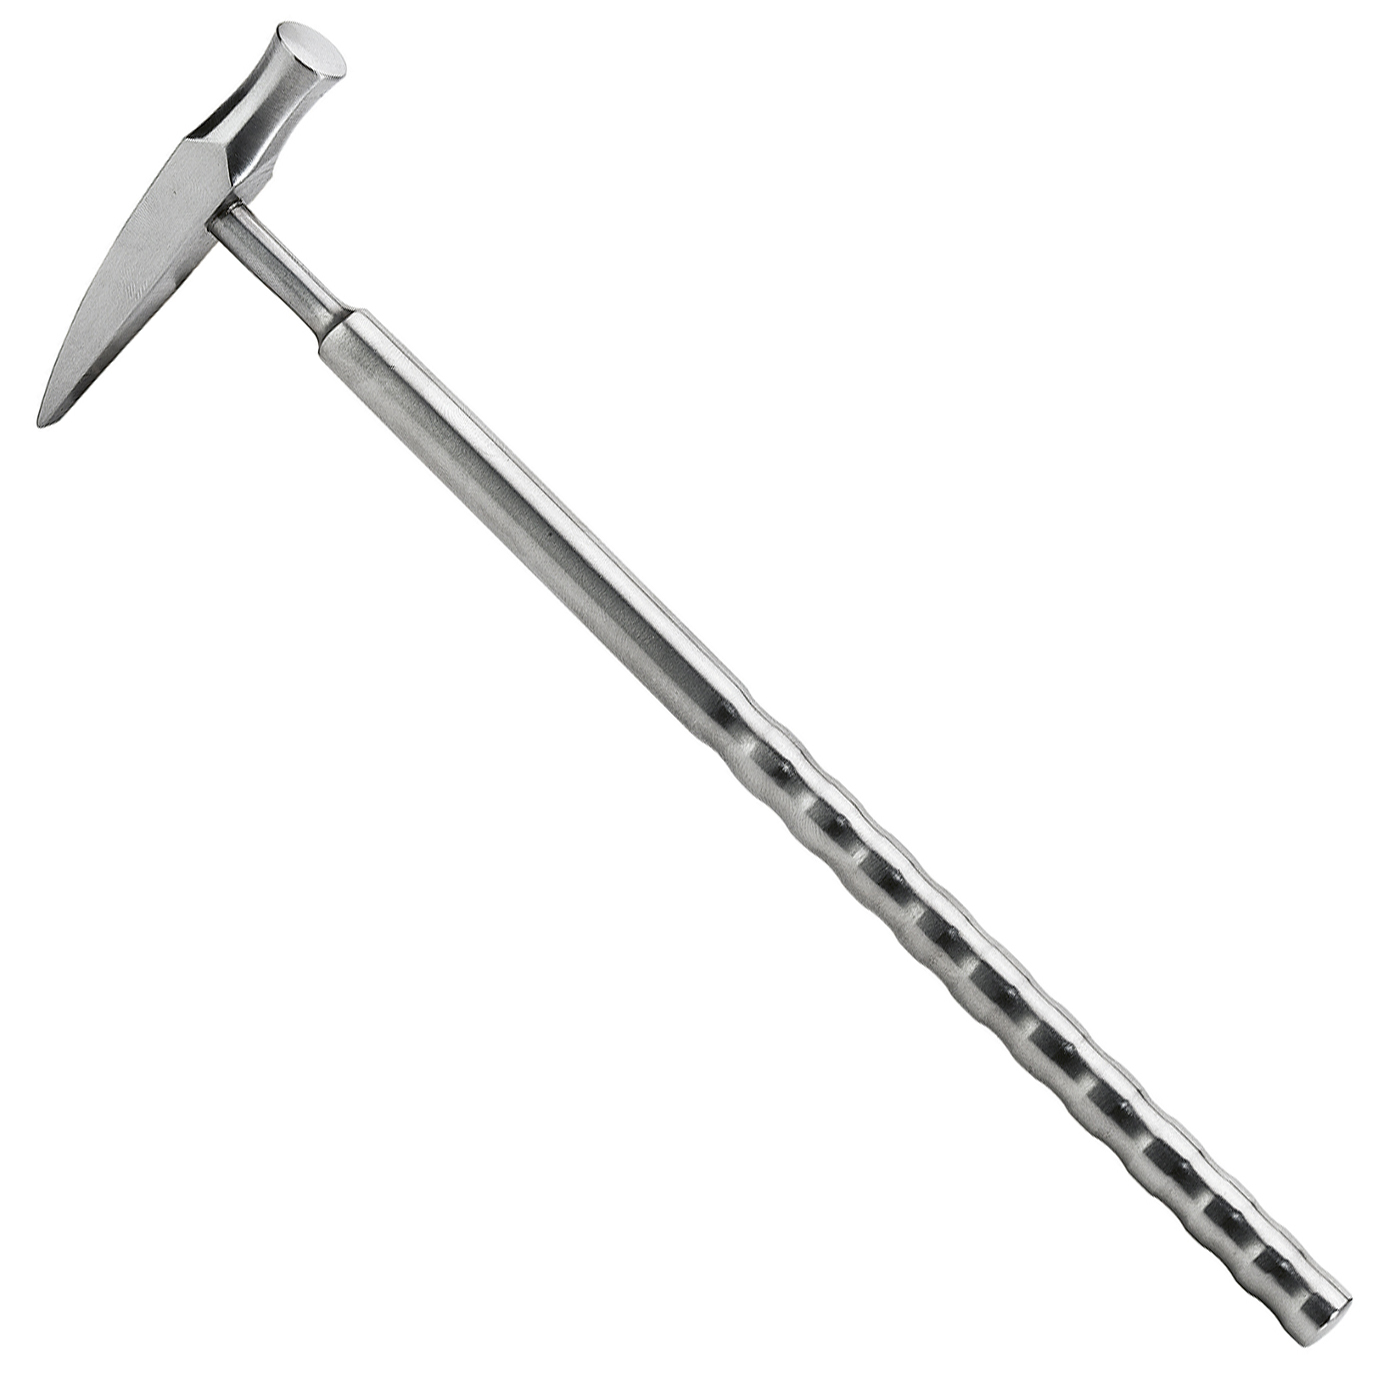 FINO Riveting Hammer, Stainless Steel, 220 mm - 1 piece